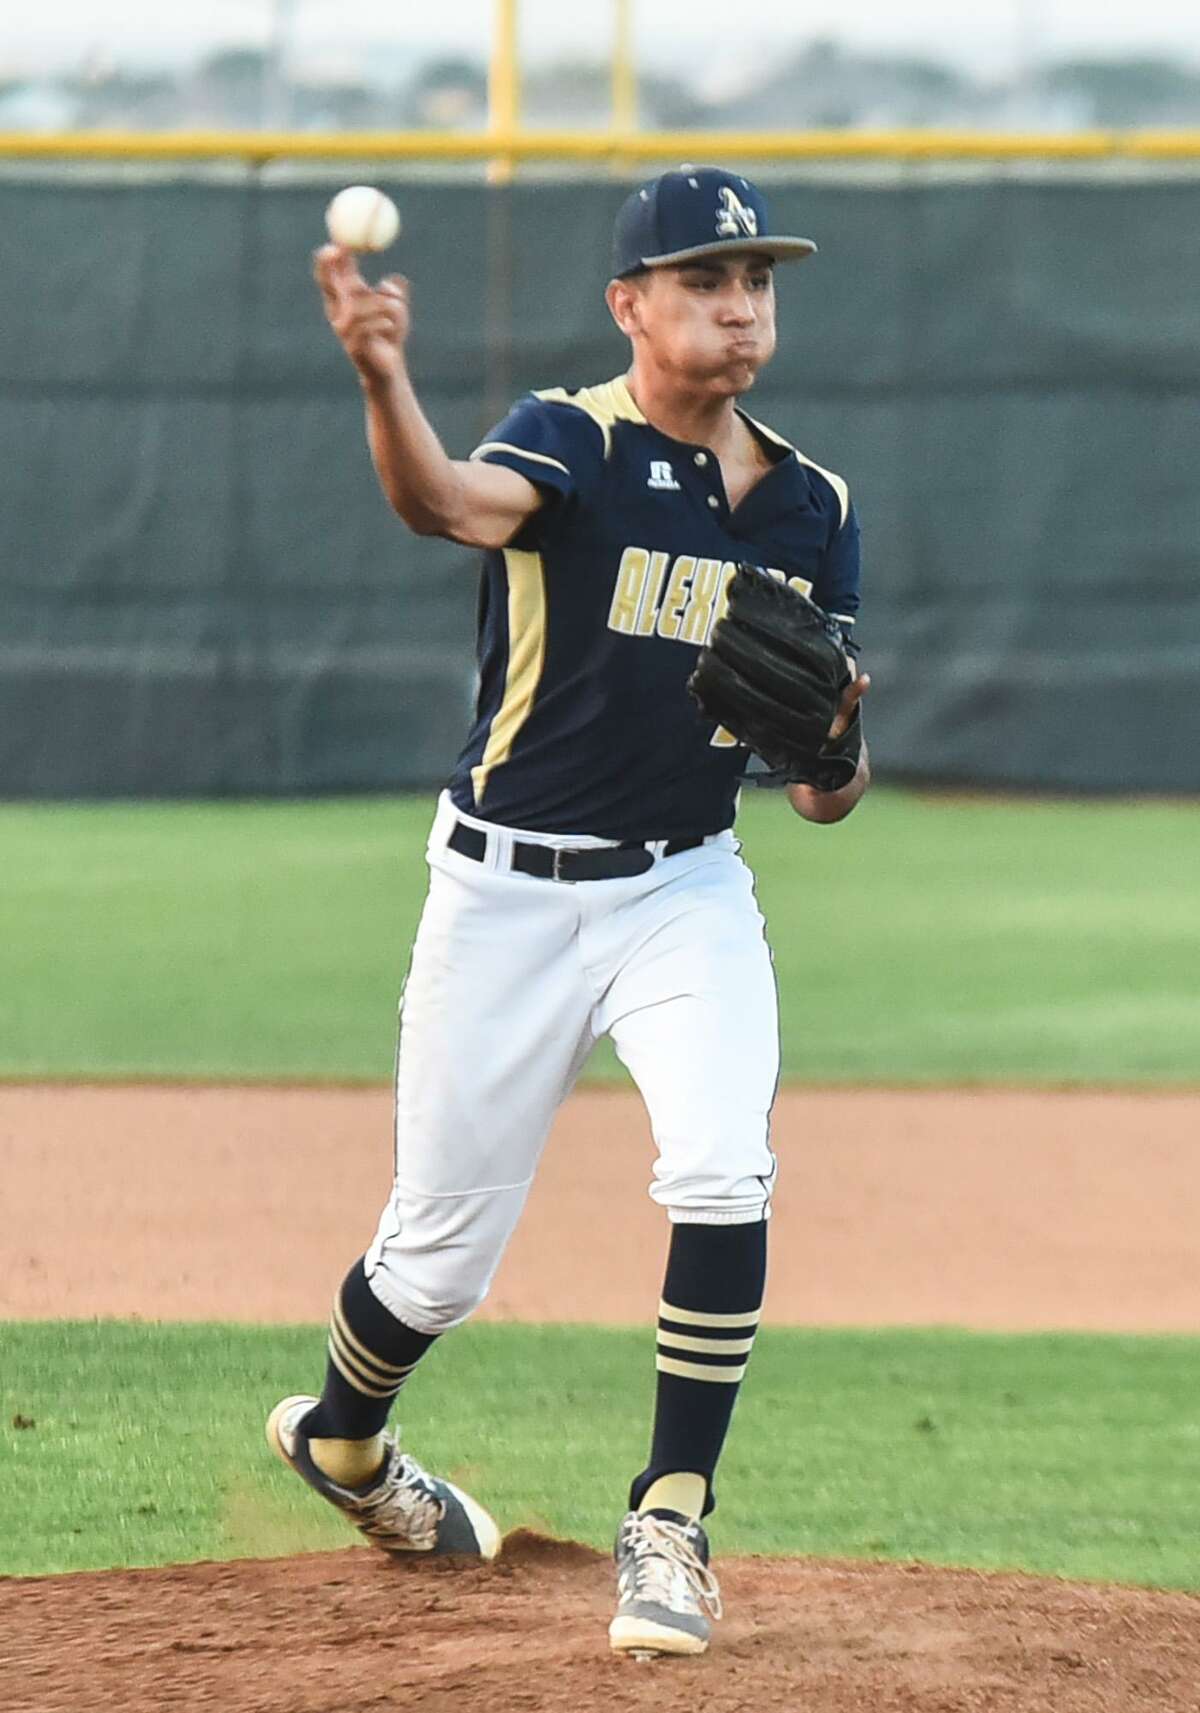 Paco Hernandez went 4-1 with a 1.93 ERA, 1.05 WHIP and 44 strikeouts in 42 innings as a sophomore. He also hit .222 with 27 RBIs and 15 runs.